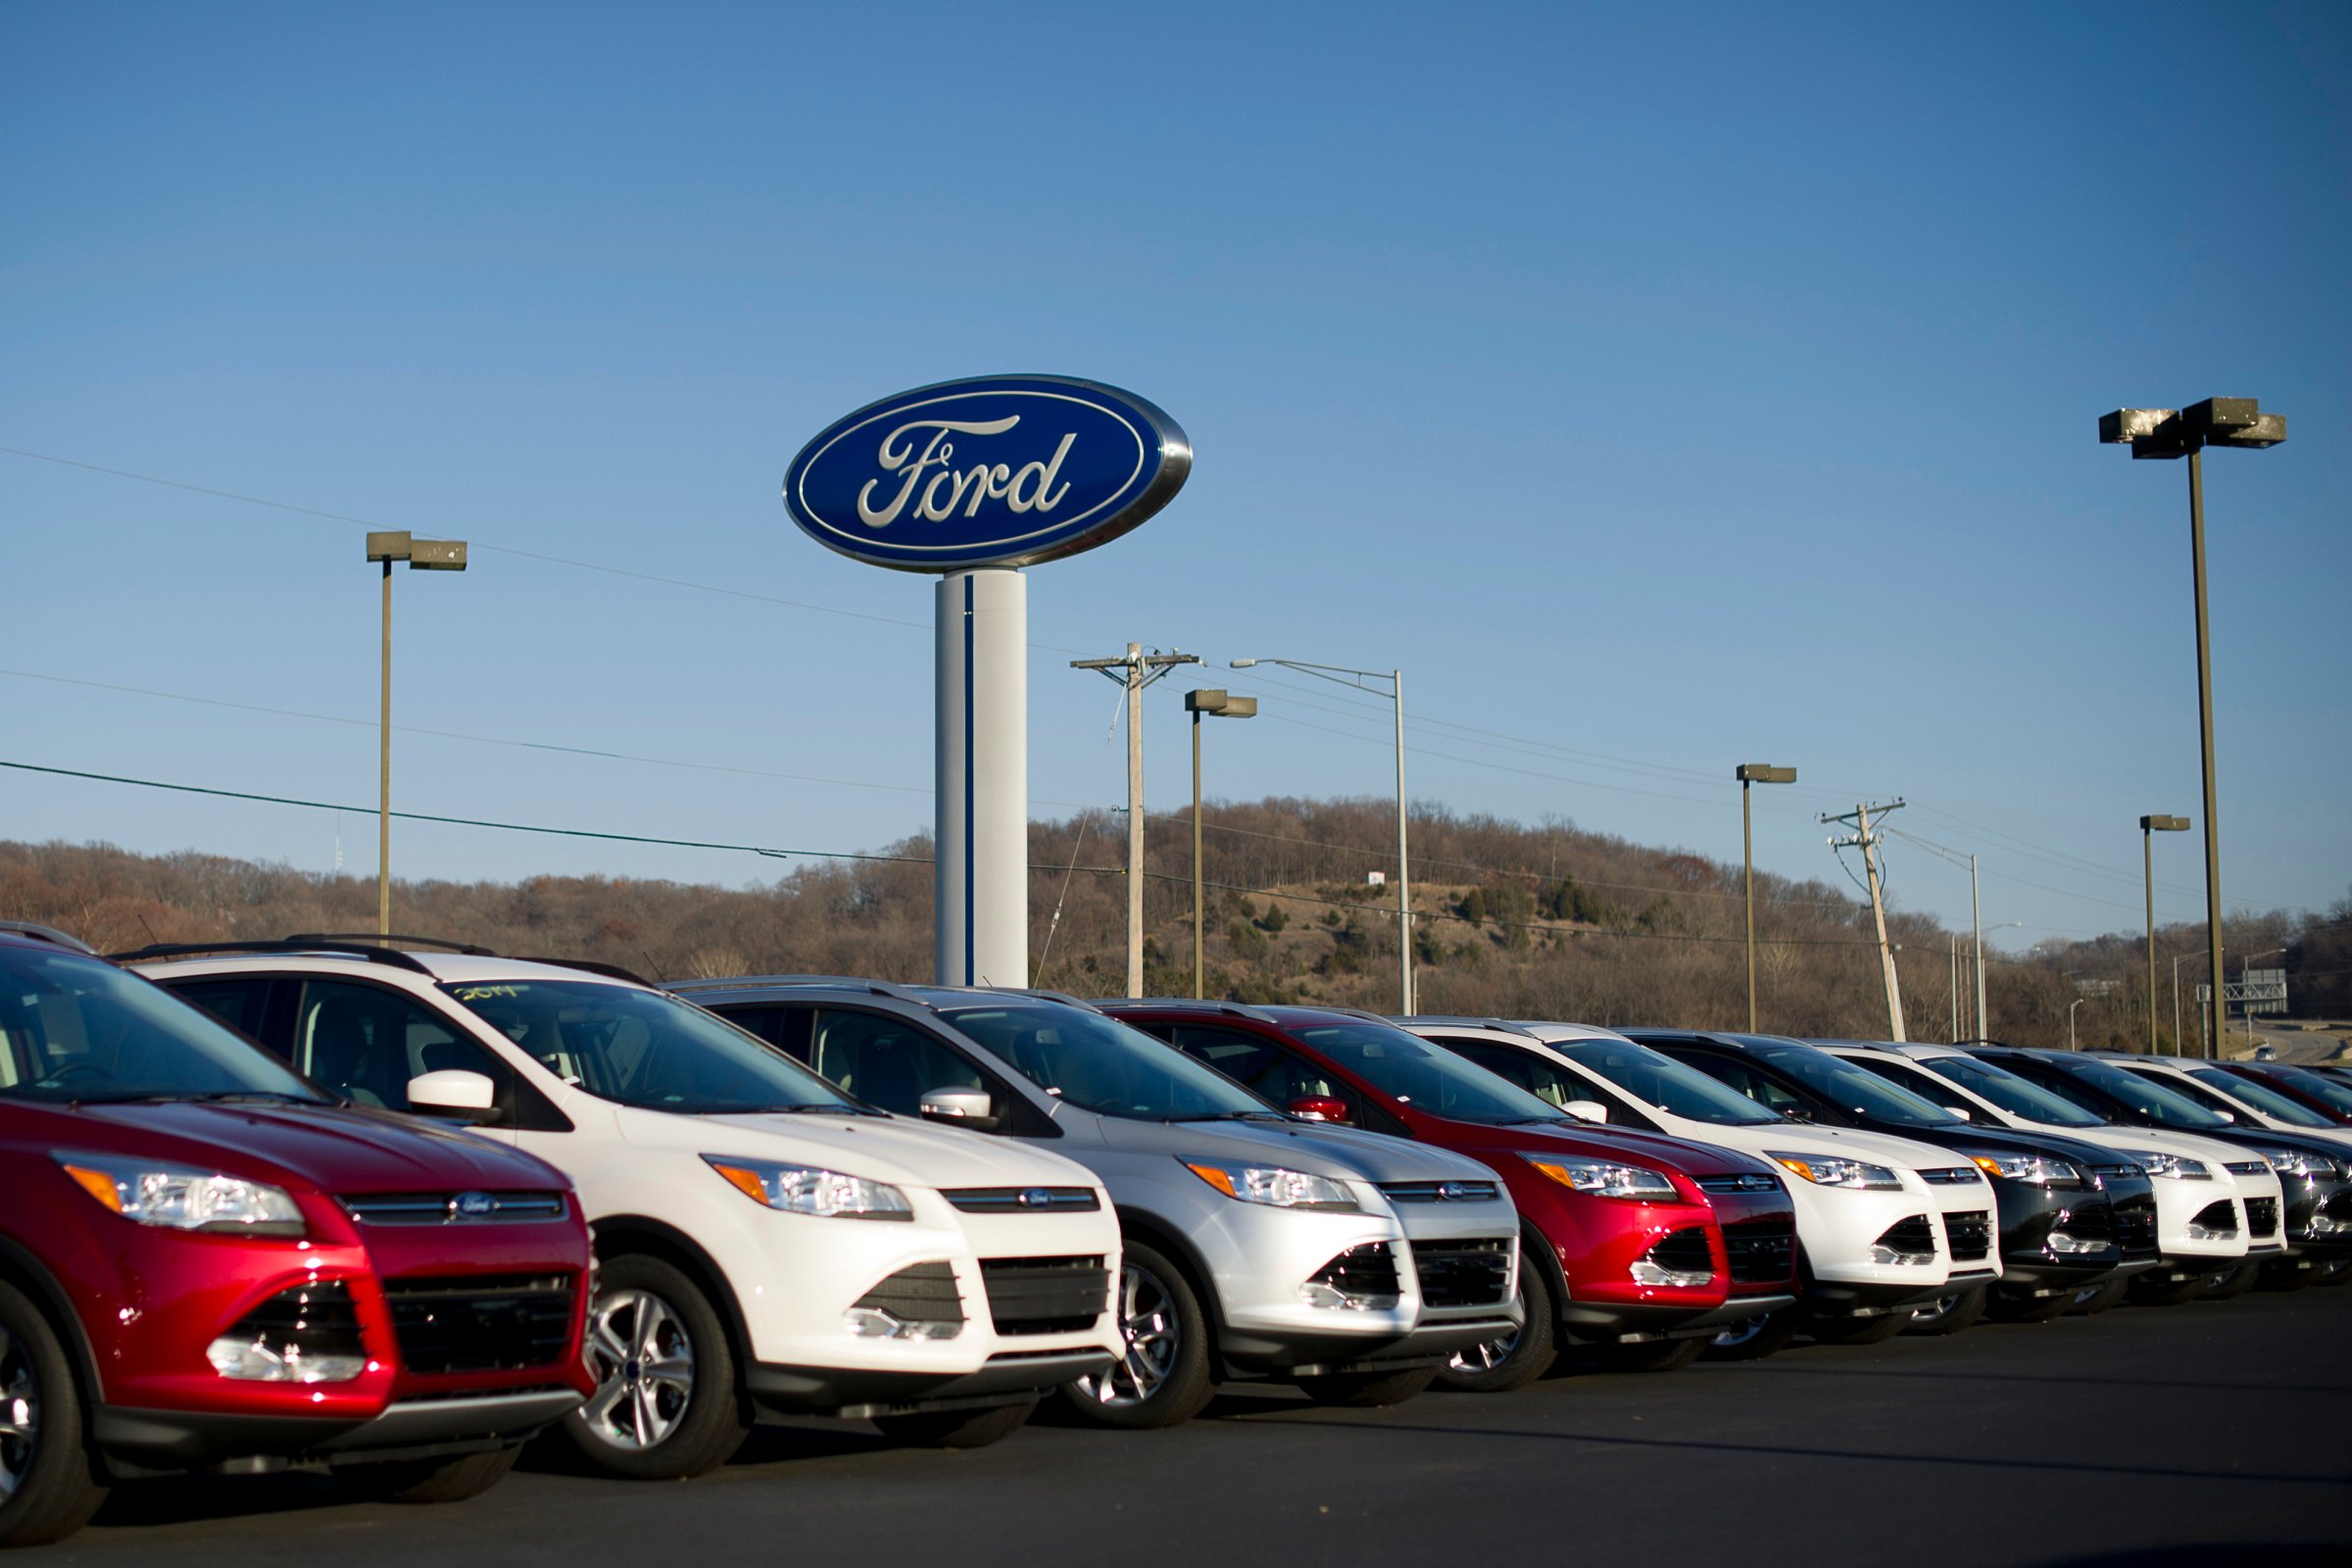 Ford Escape Airbag Recall